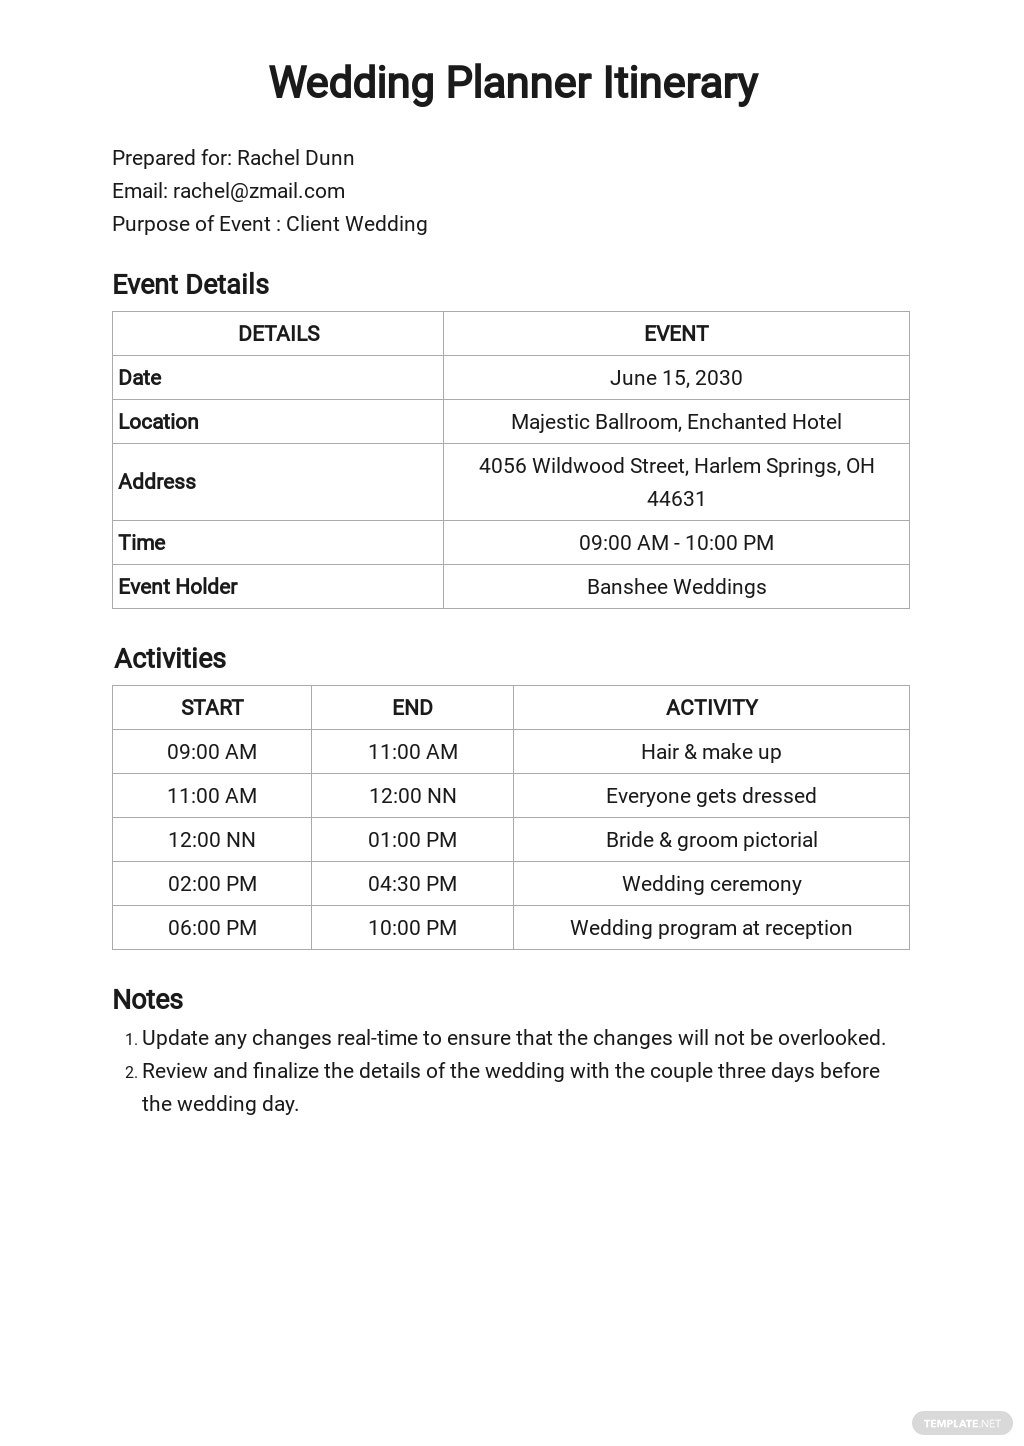 free-wedding-planner-itinerary-template